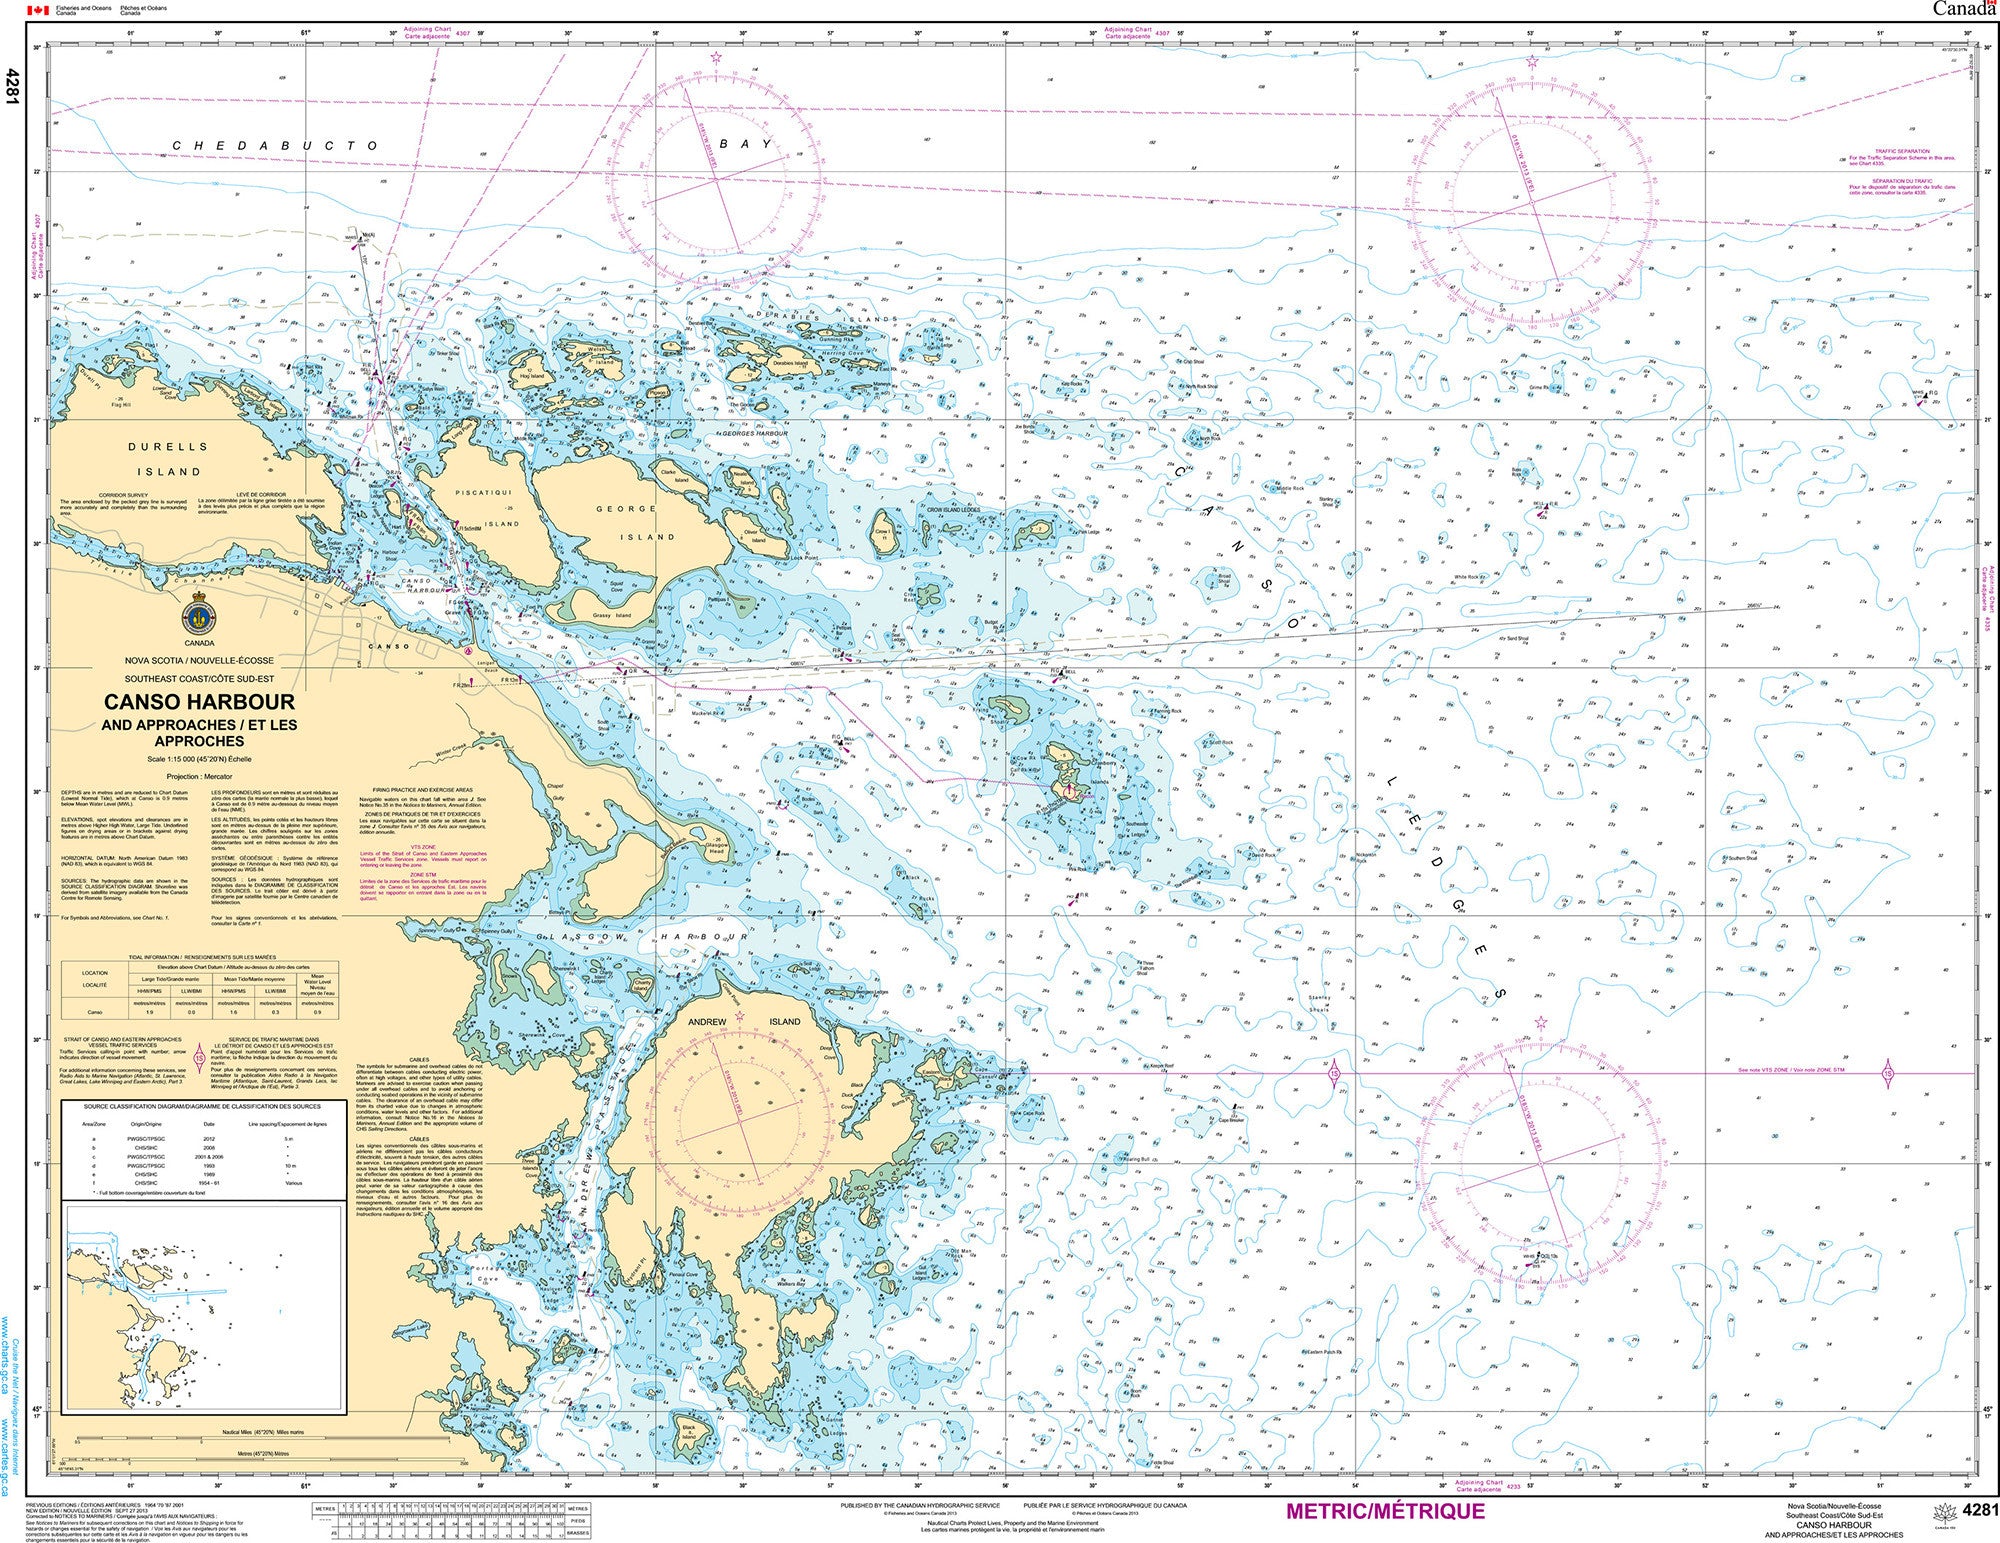 Canadian Hydrographic Service Nautical Chart CHS4281: Canso Harbour and Approaches/et les approches